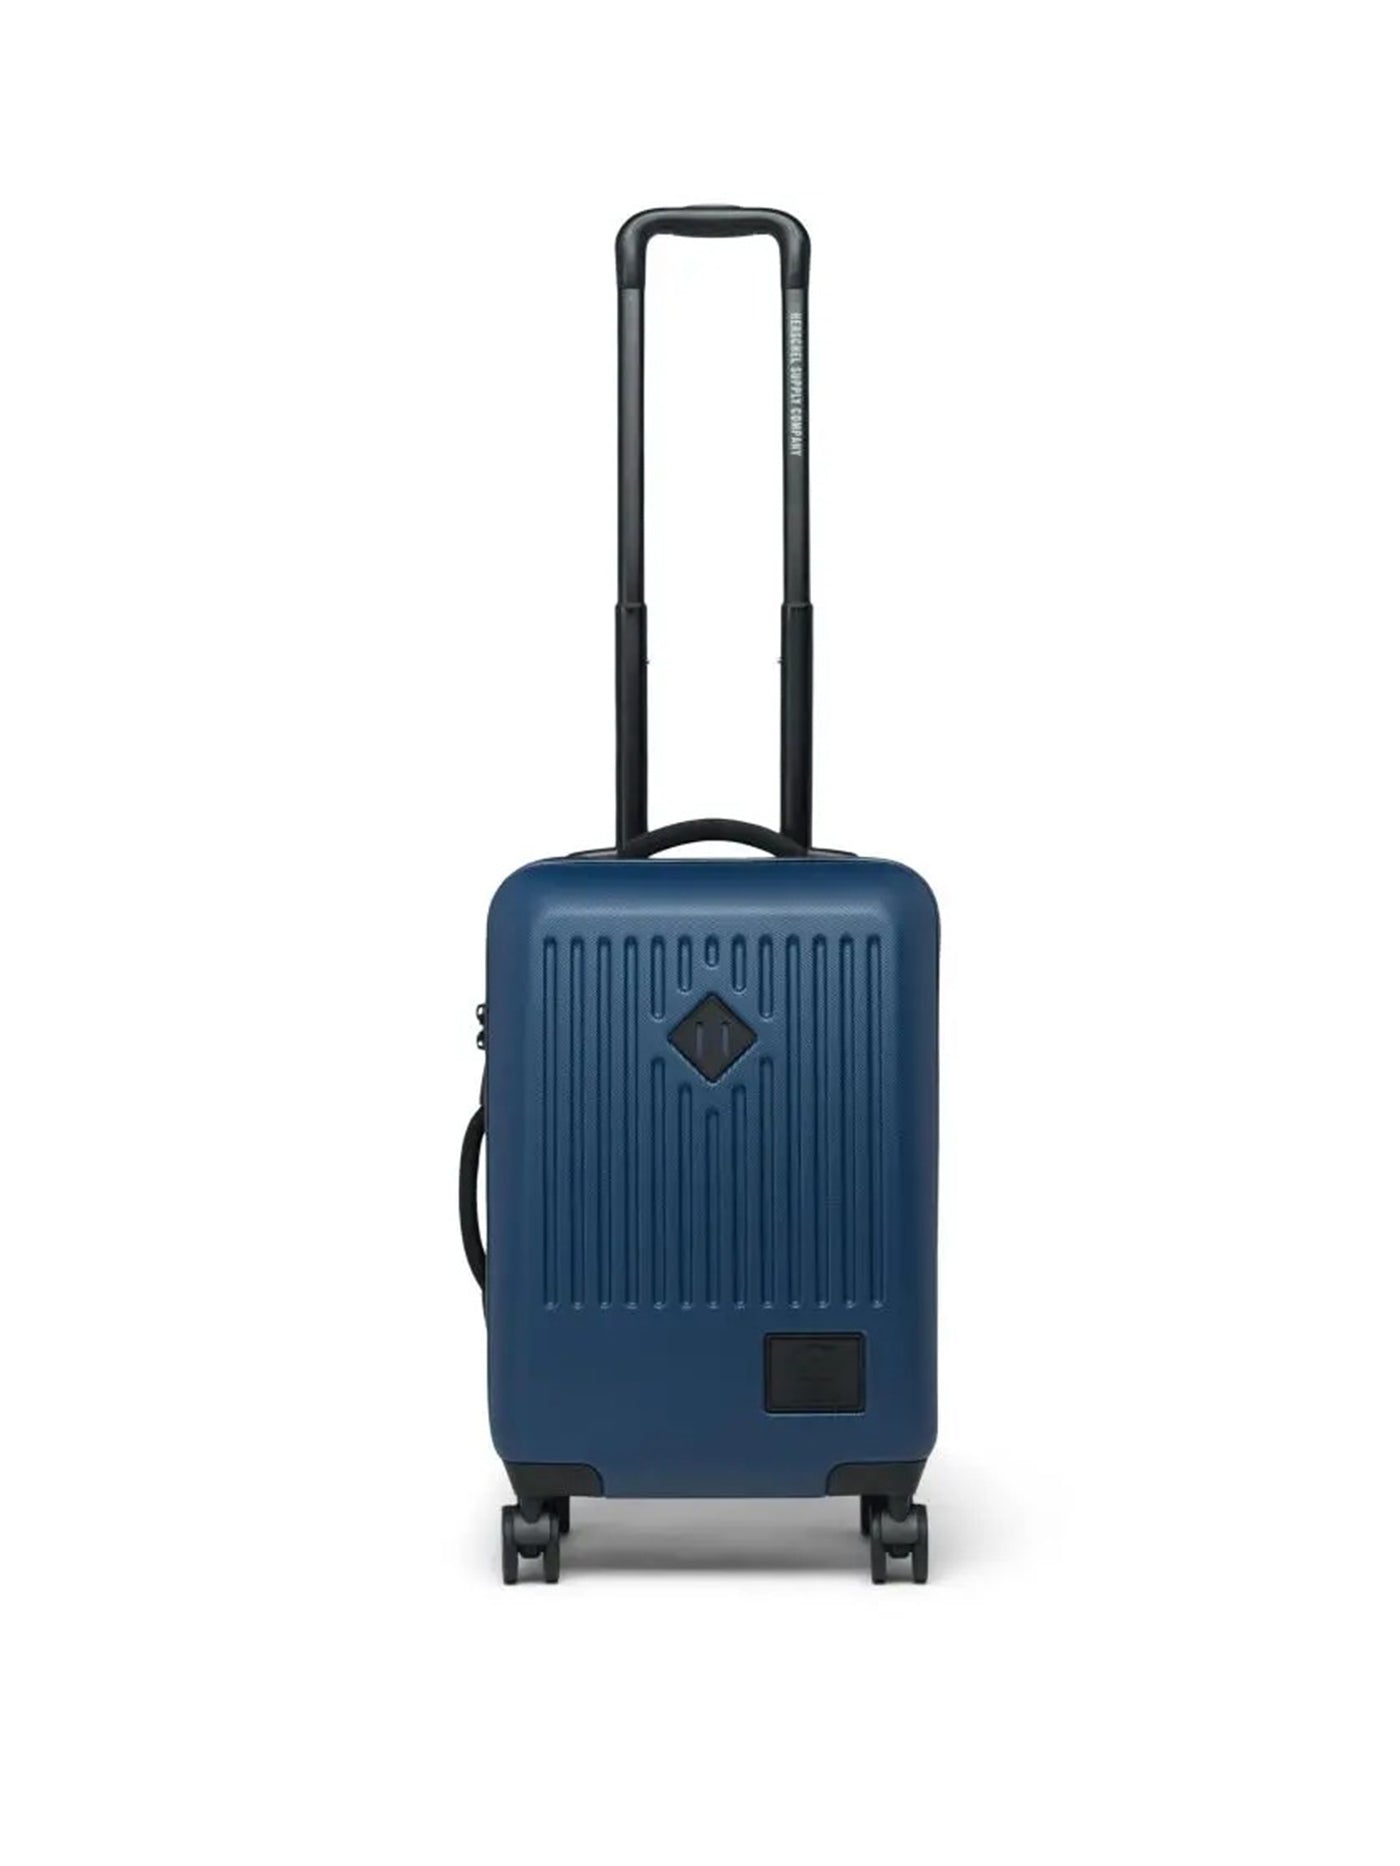 Herschel Trade Carry-On Large Suitcase